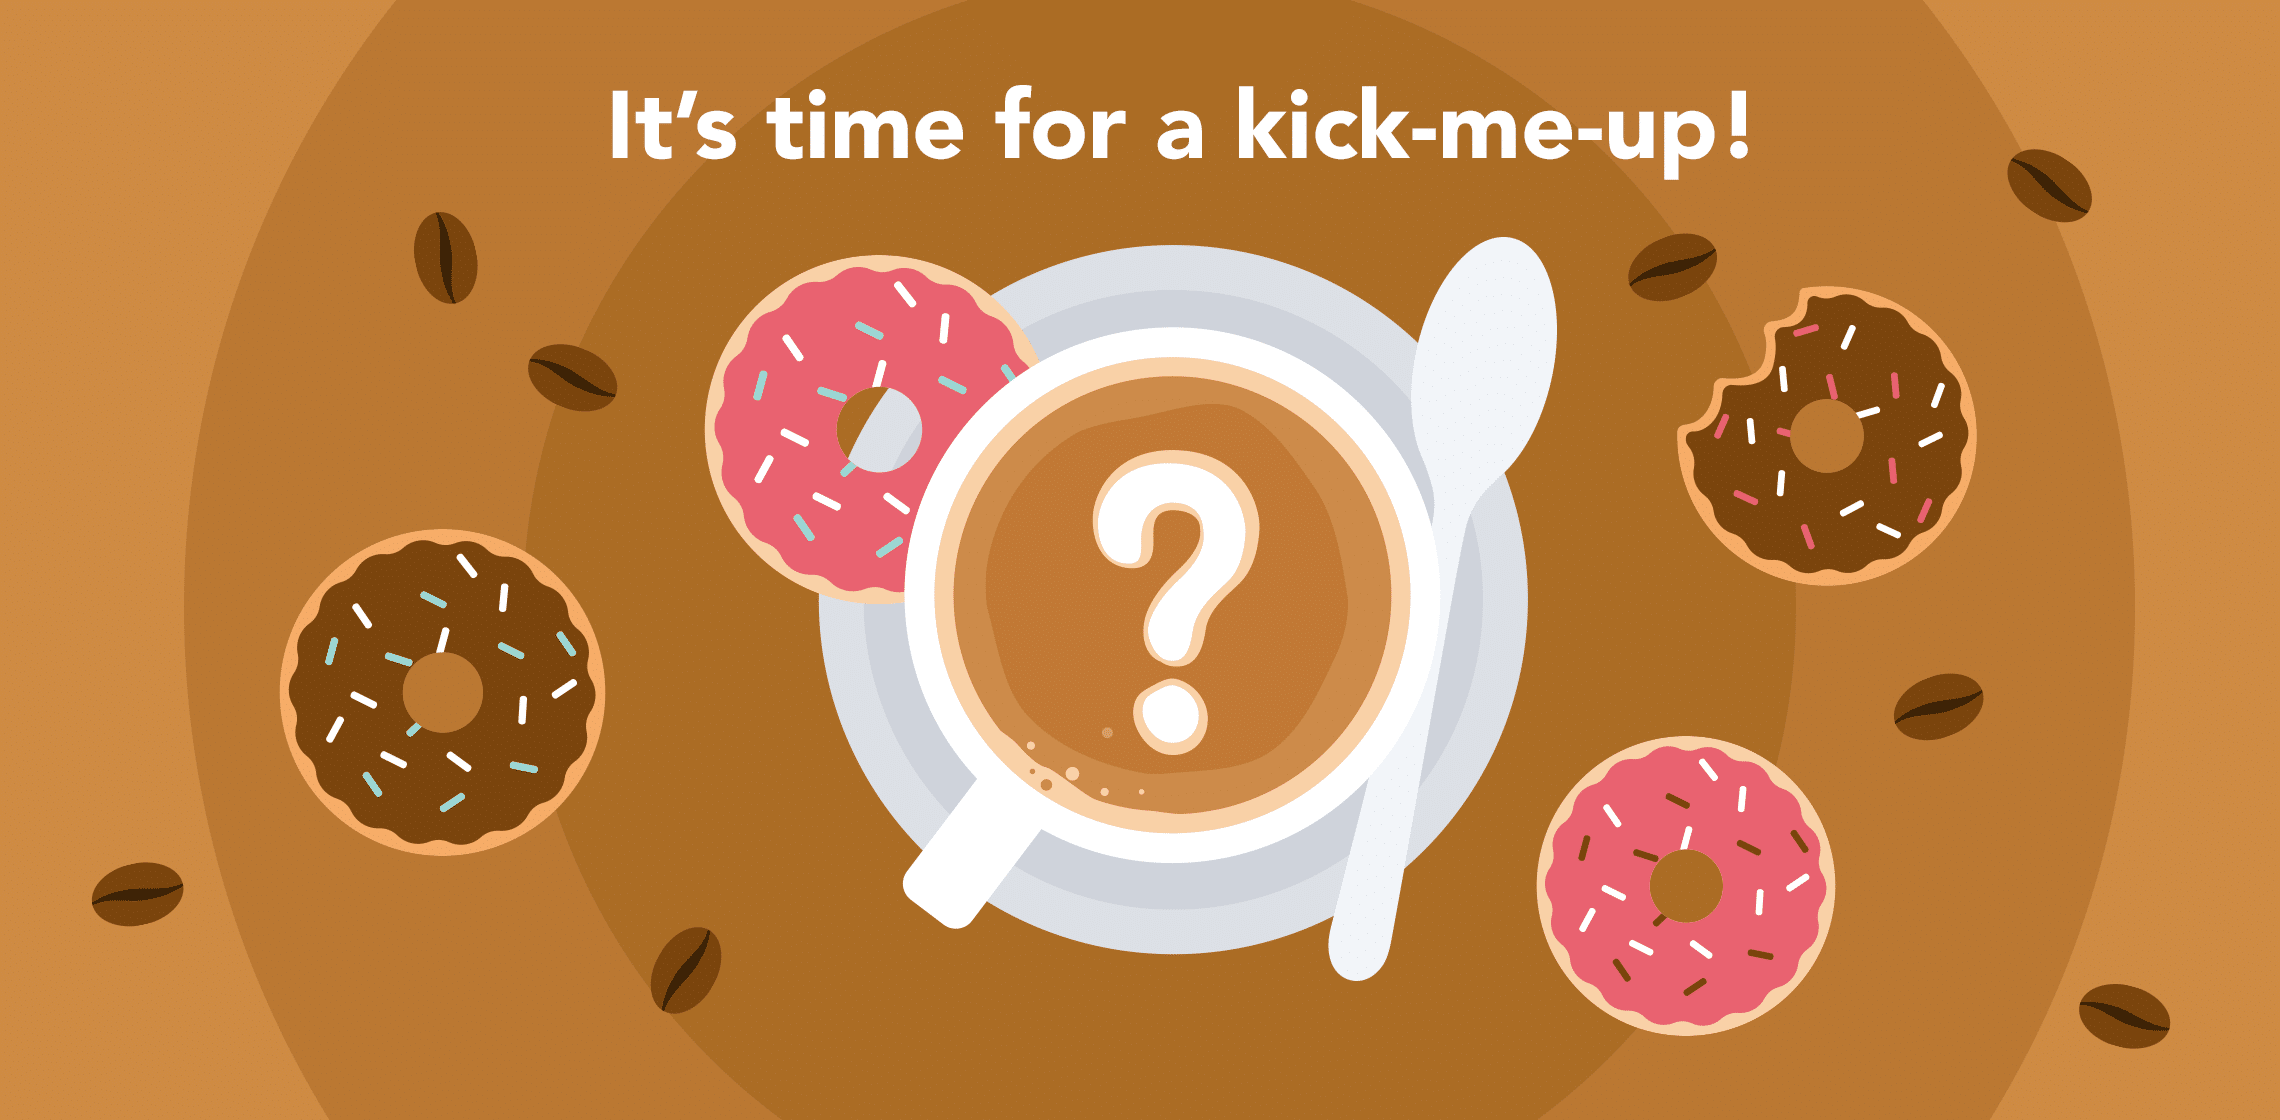 It’s time for a kick-me-up!